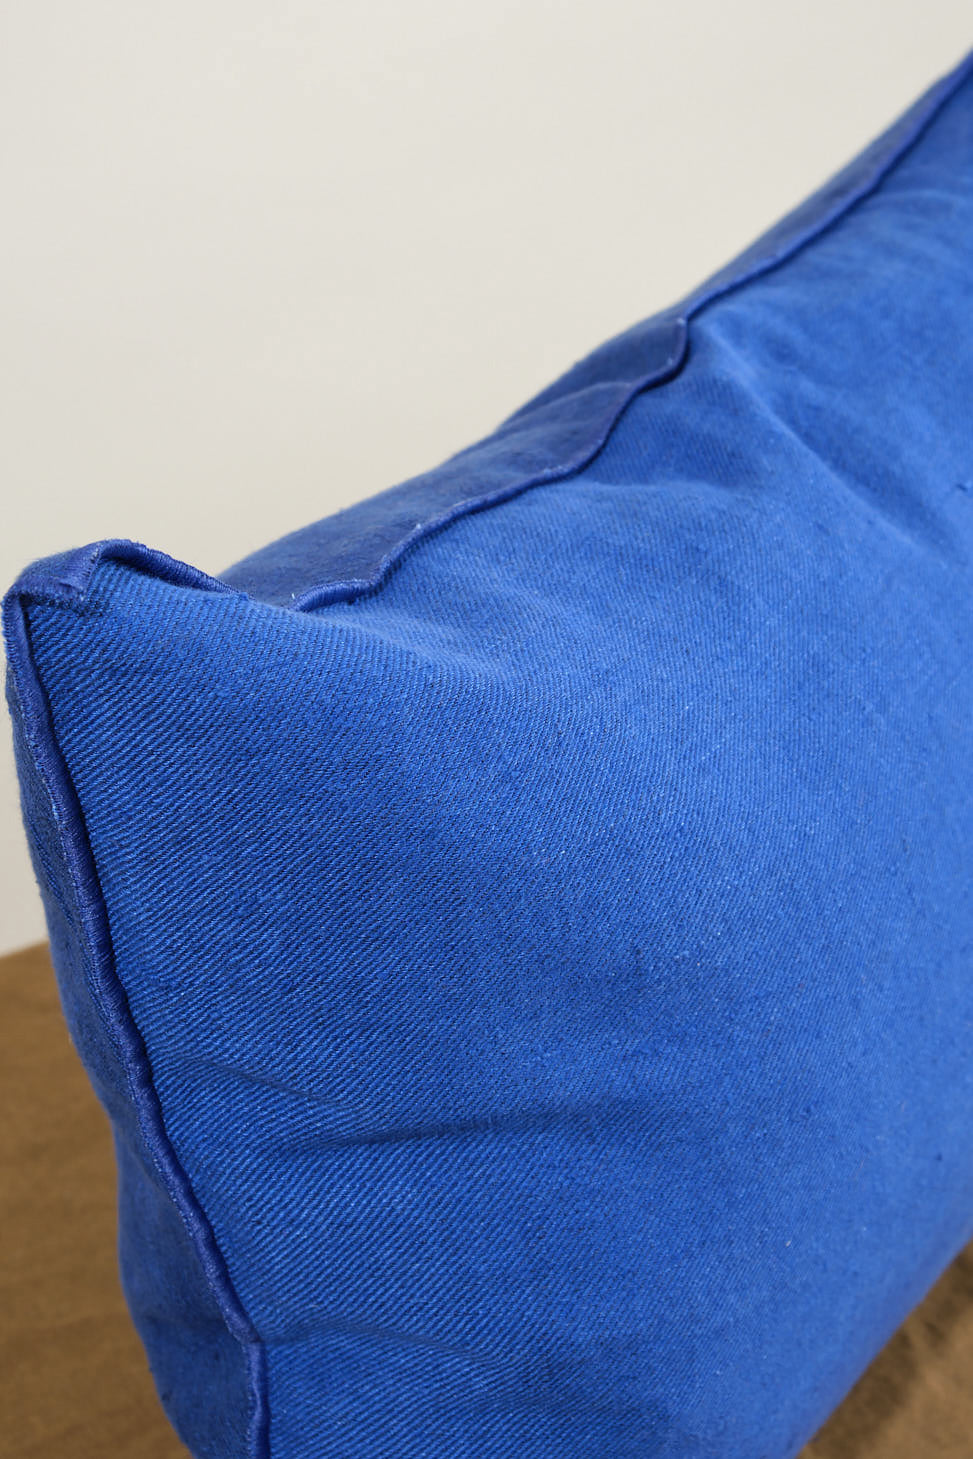 Side of 16" X 24" Washed Linen Vise Versa Cushion in Cobalt